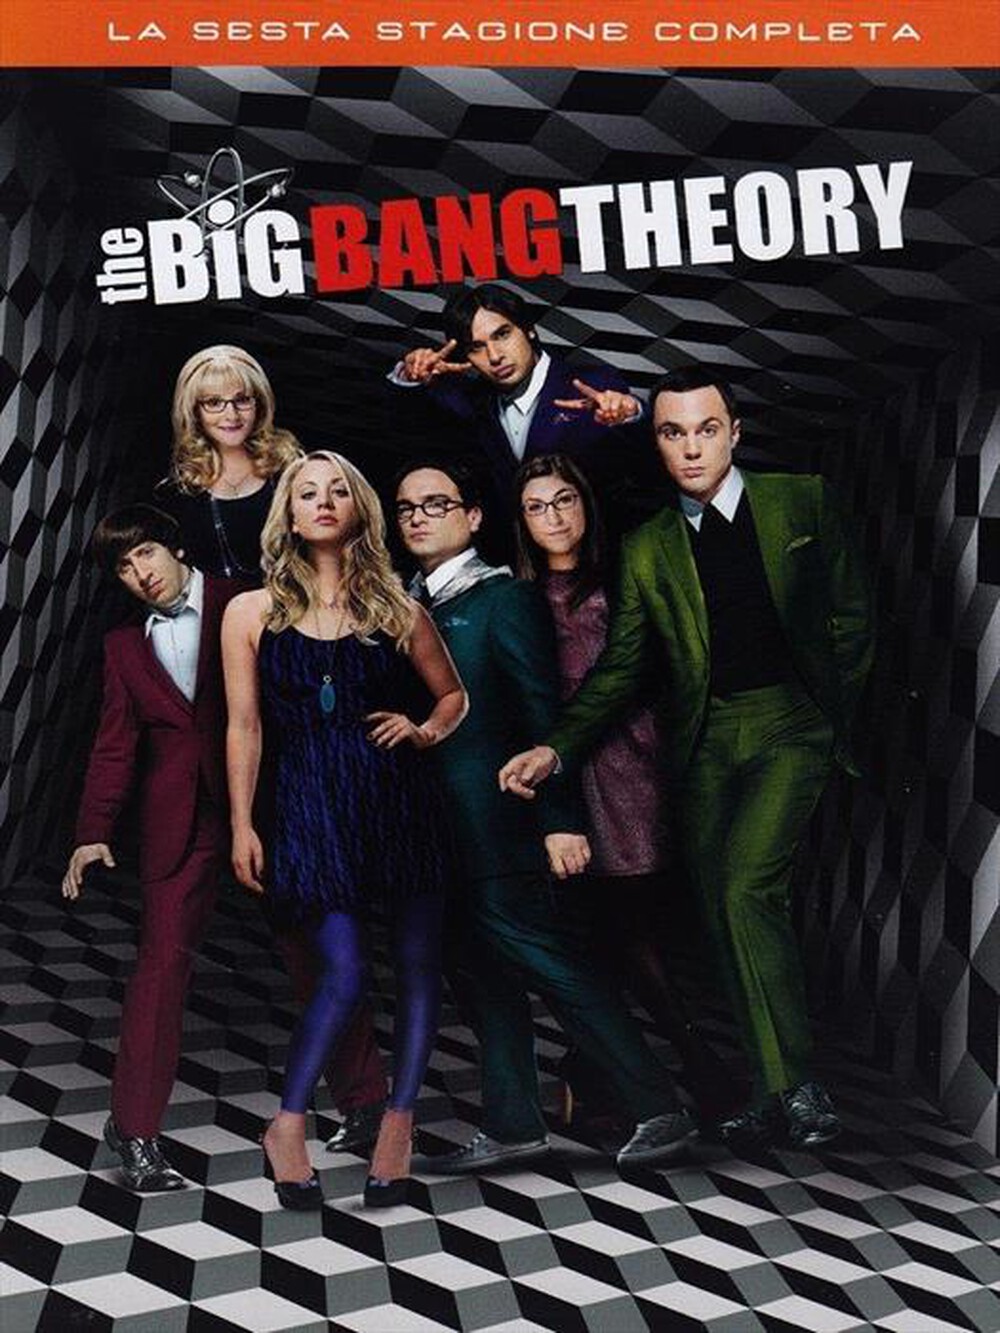 "WARNER HOME VIDEO - Big Bang Theory (The) - Stagione 06 (3 Dvd)"